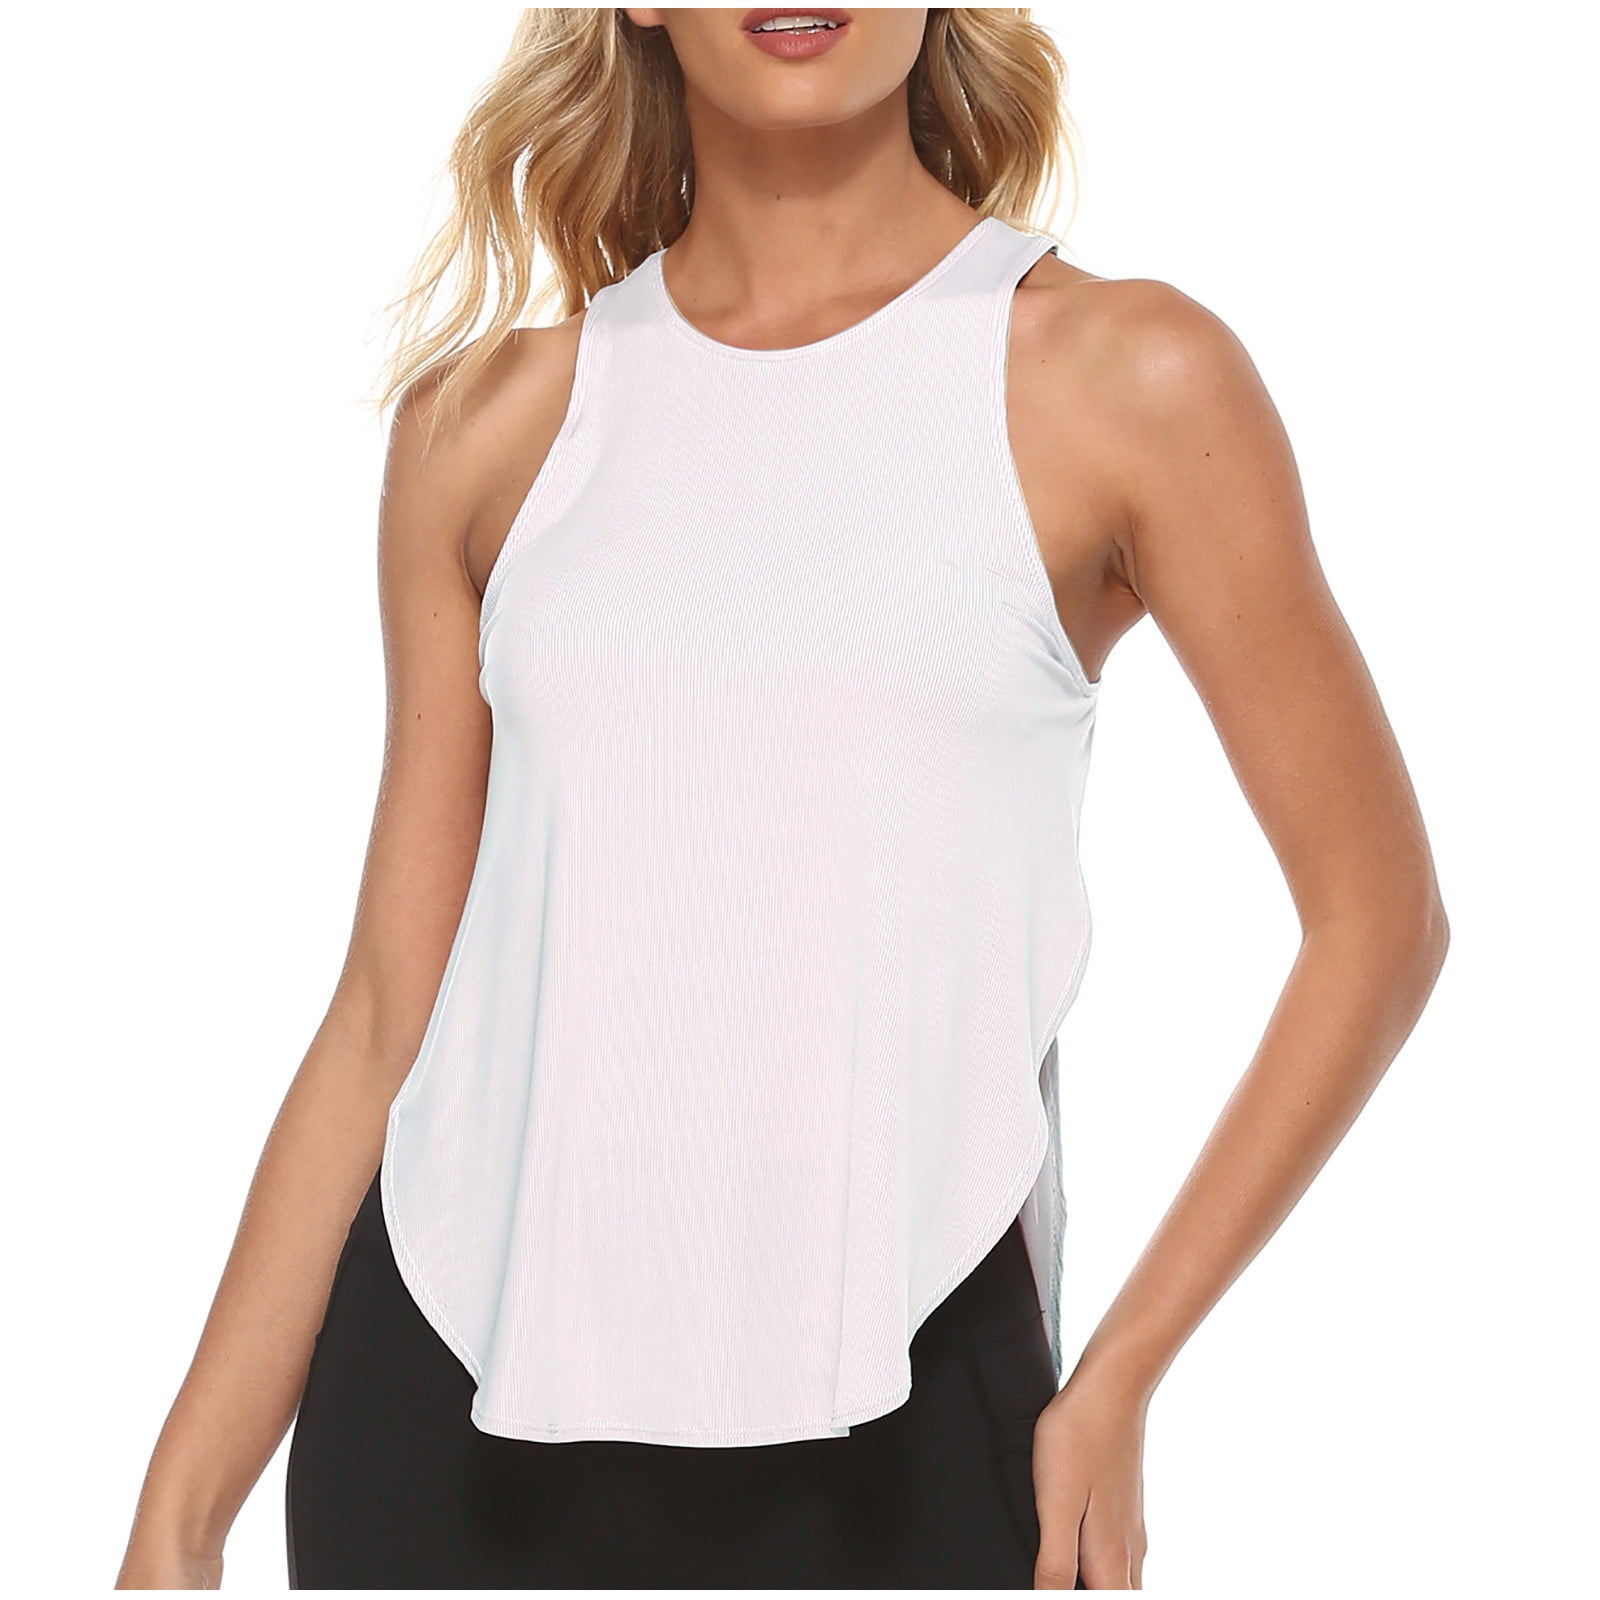 RQYYD Discount Workout Tank Tops for Women Sleeveless Racerback